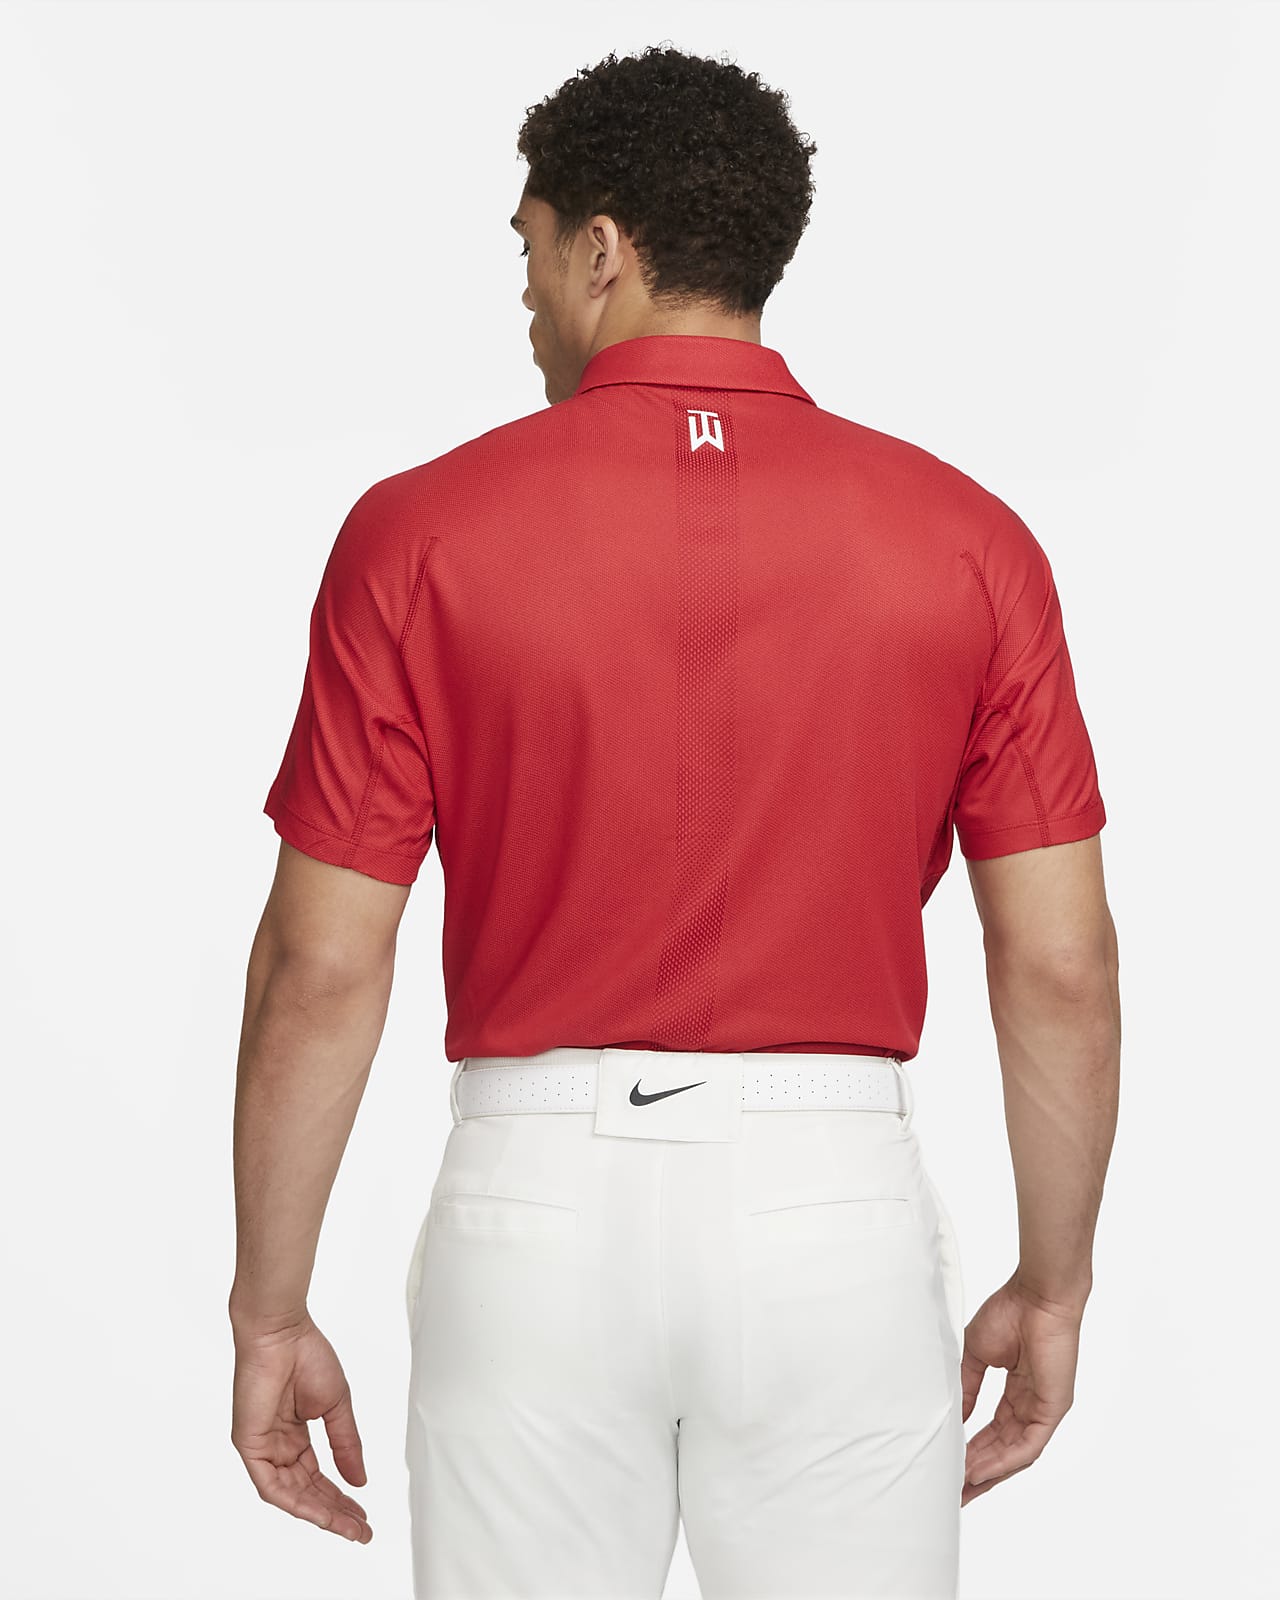 Nike Tiger Woods Collection Dri-Fit Golf White/Grey Stripe Polo